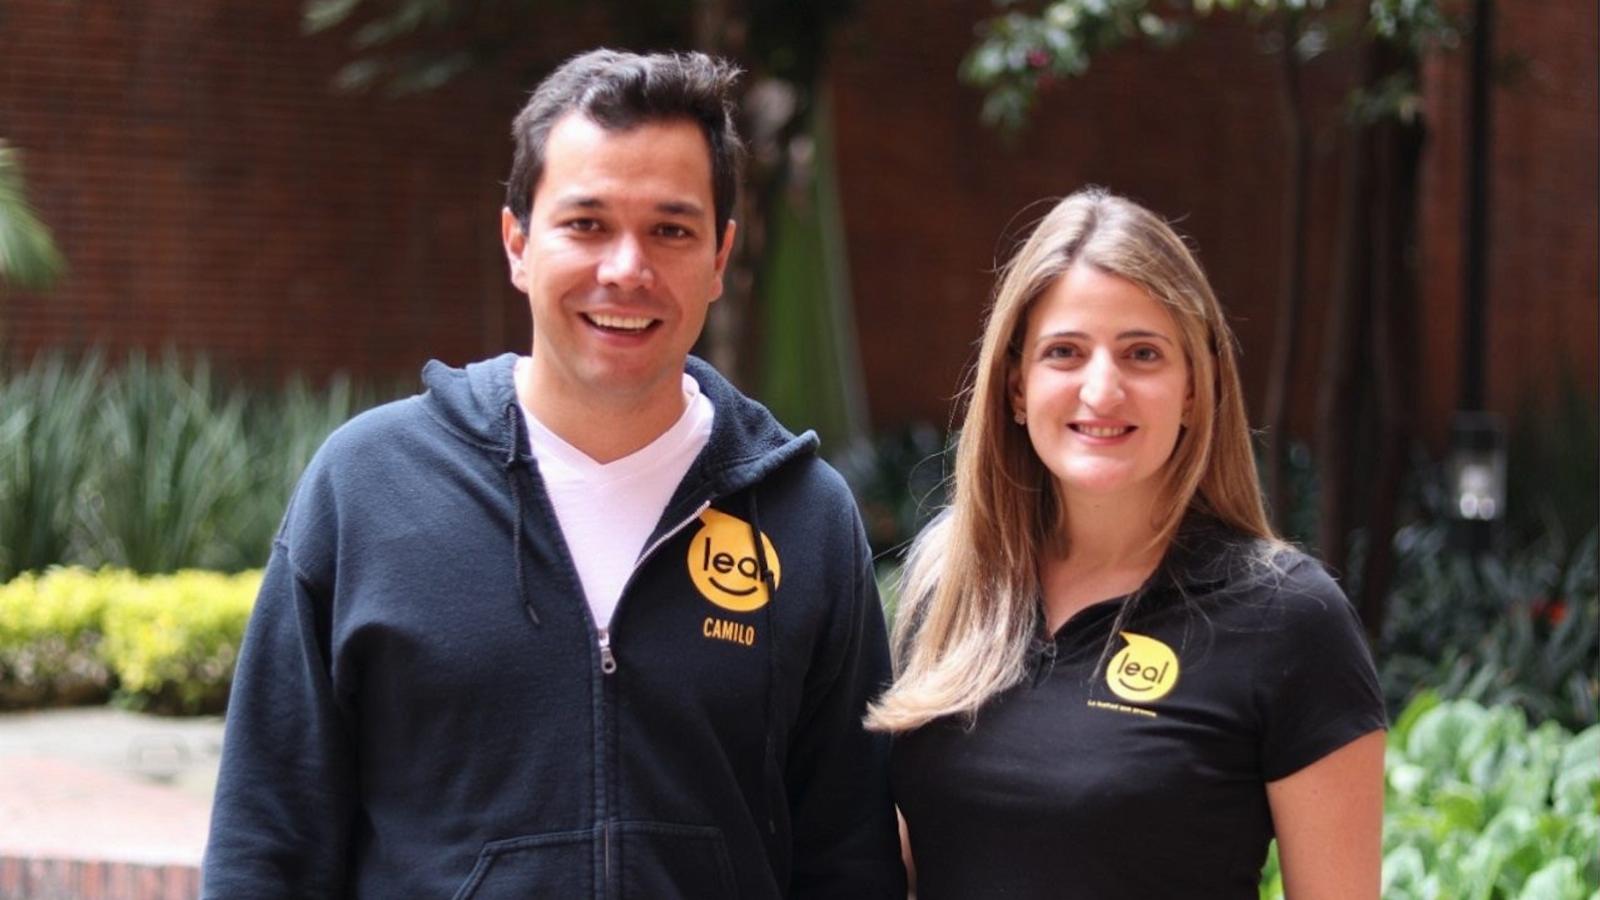 Now with $5M, Leal invests in AI-driven customer engagement for LatAm merchants